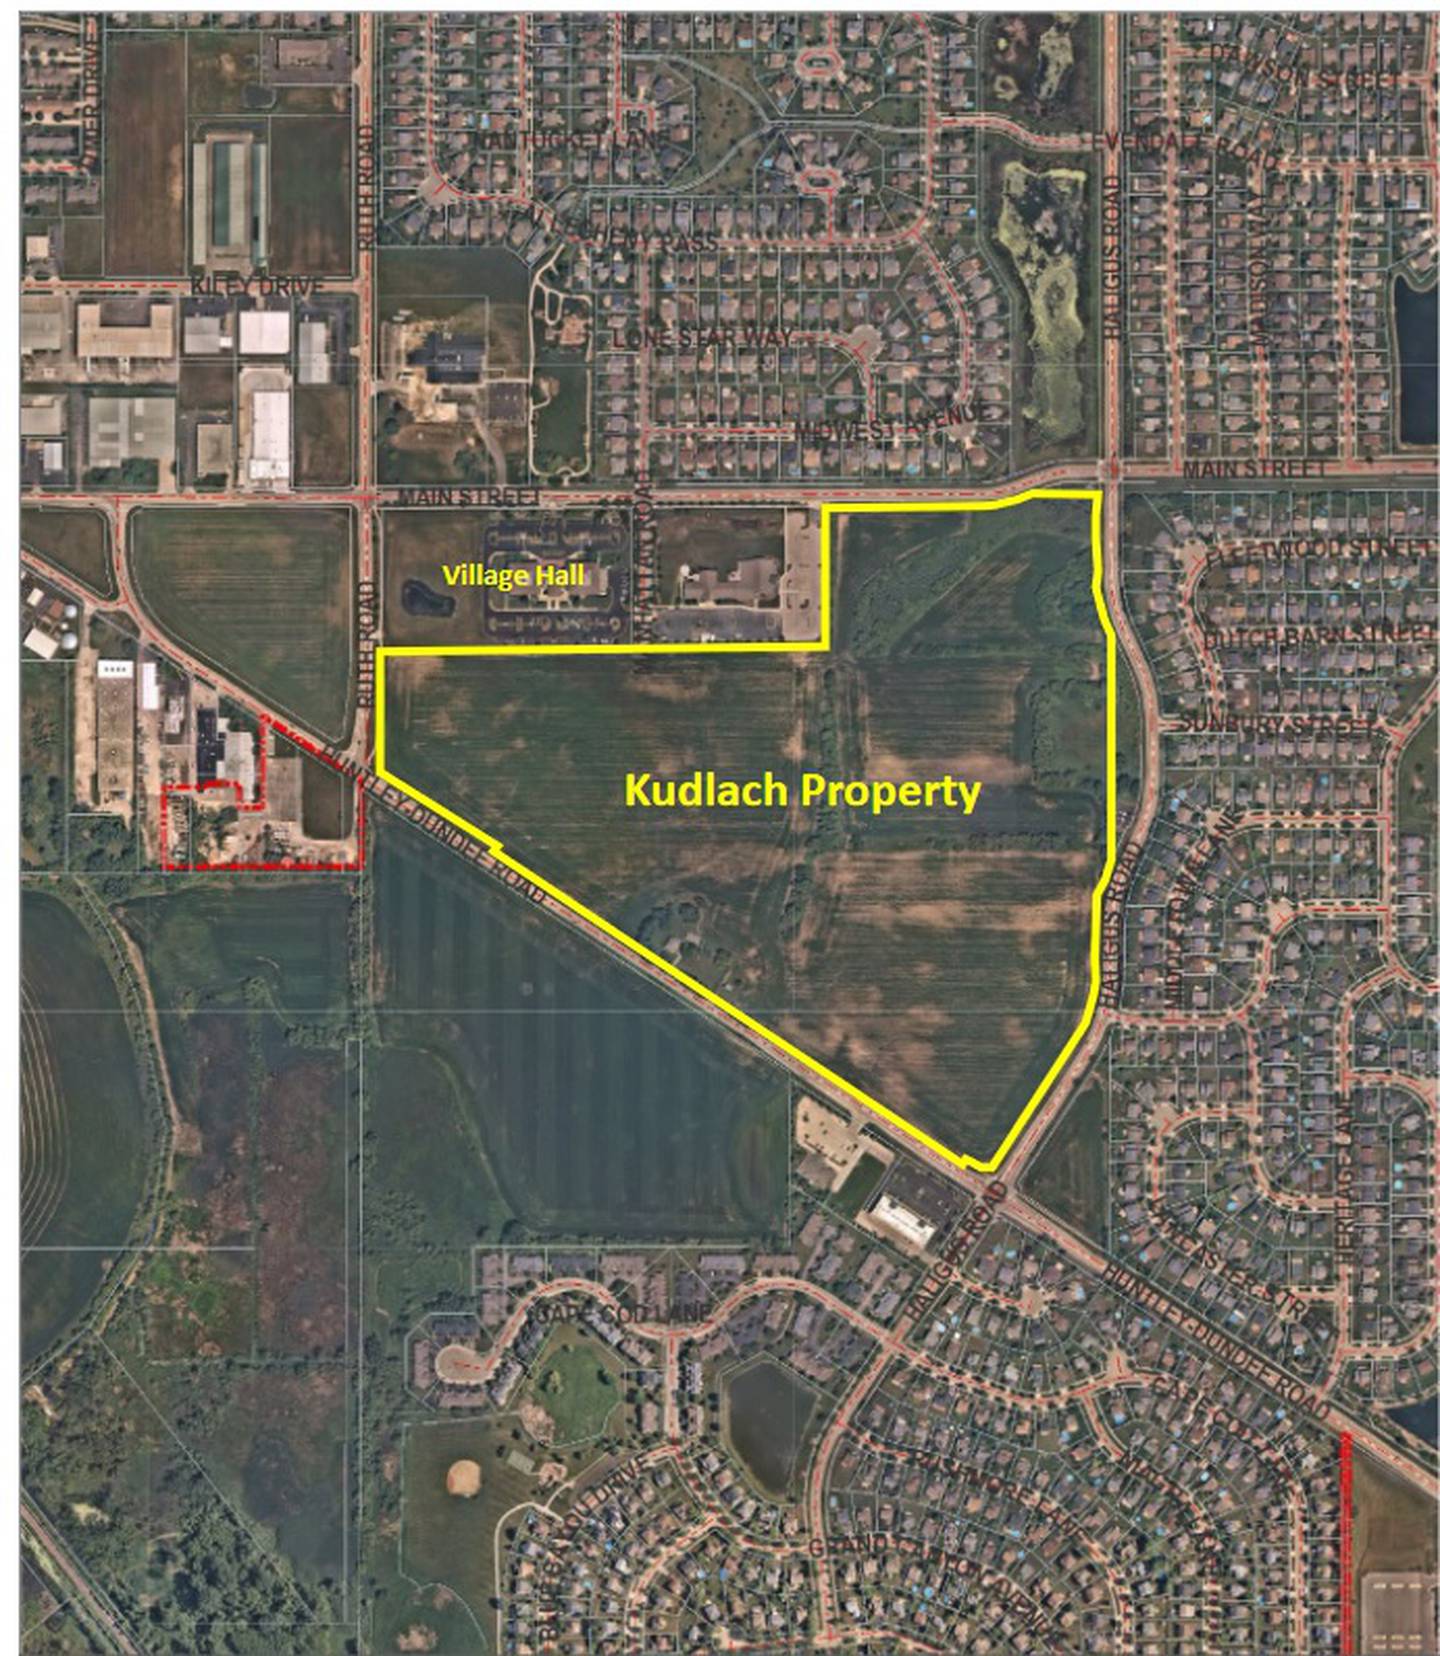 The Kudlach Property on the eastern side of Huntley is slated to have 173 single-family houses built after Trustees approved a development project at the spot during their April 14, 2022 meeting.